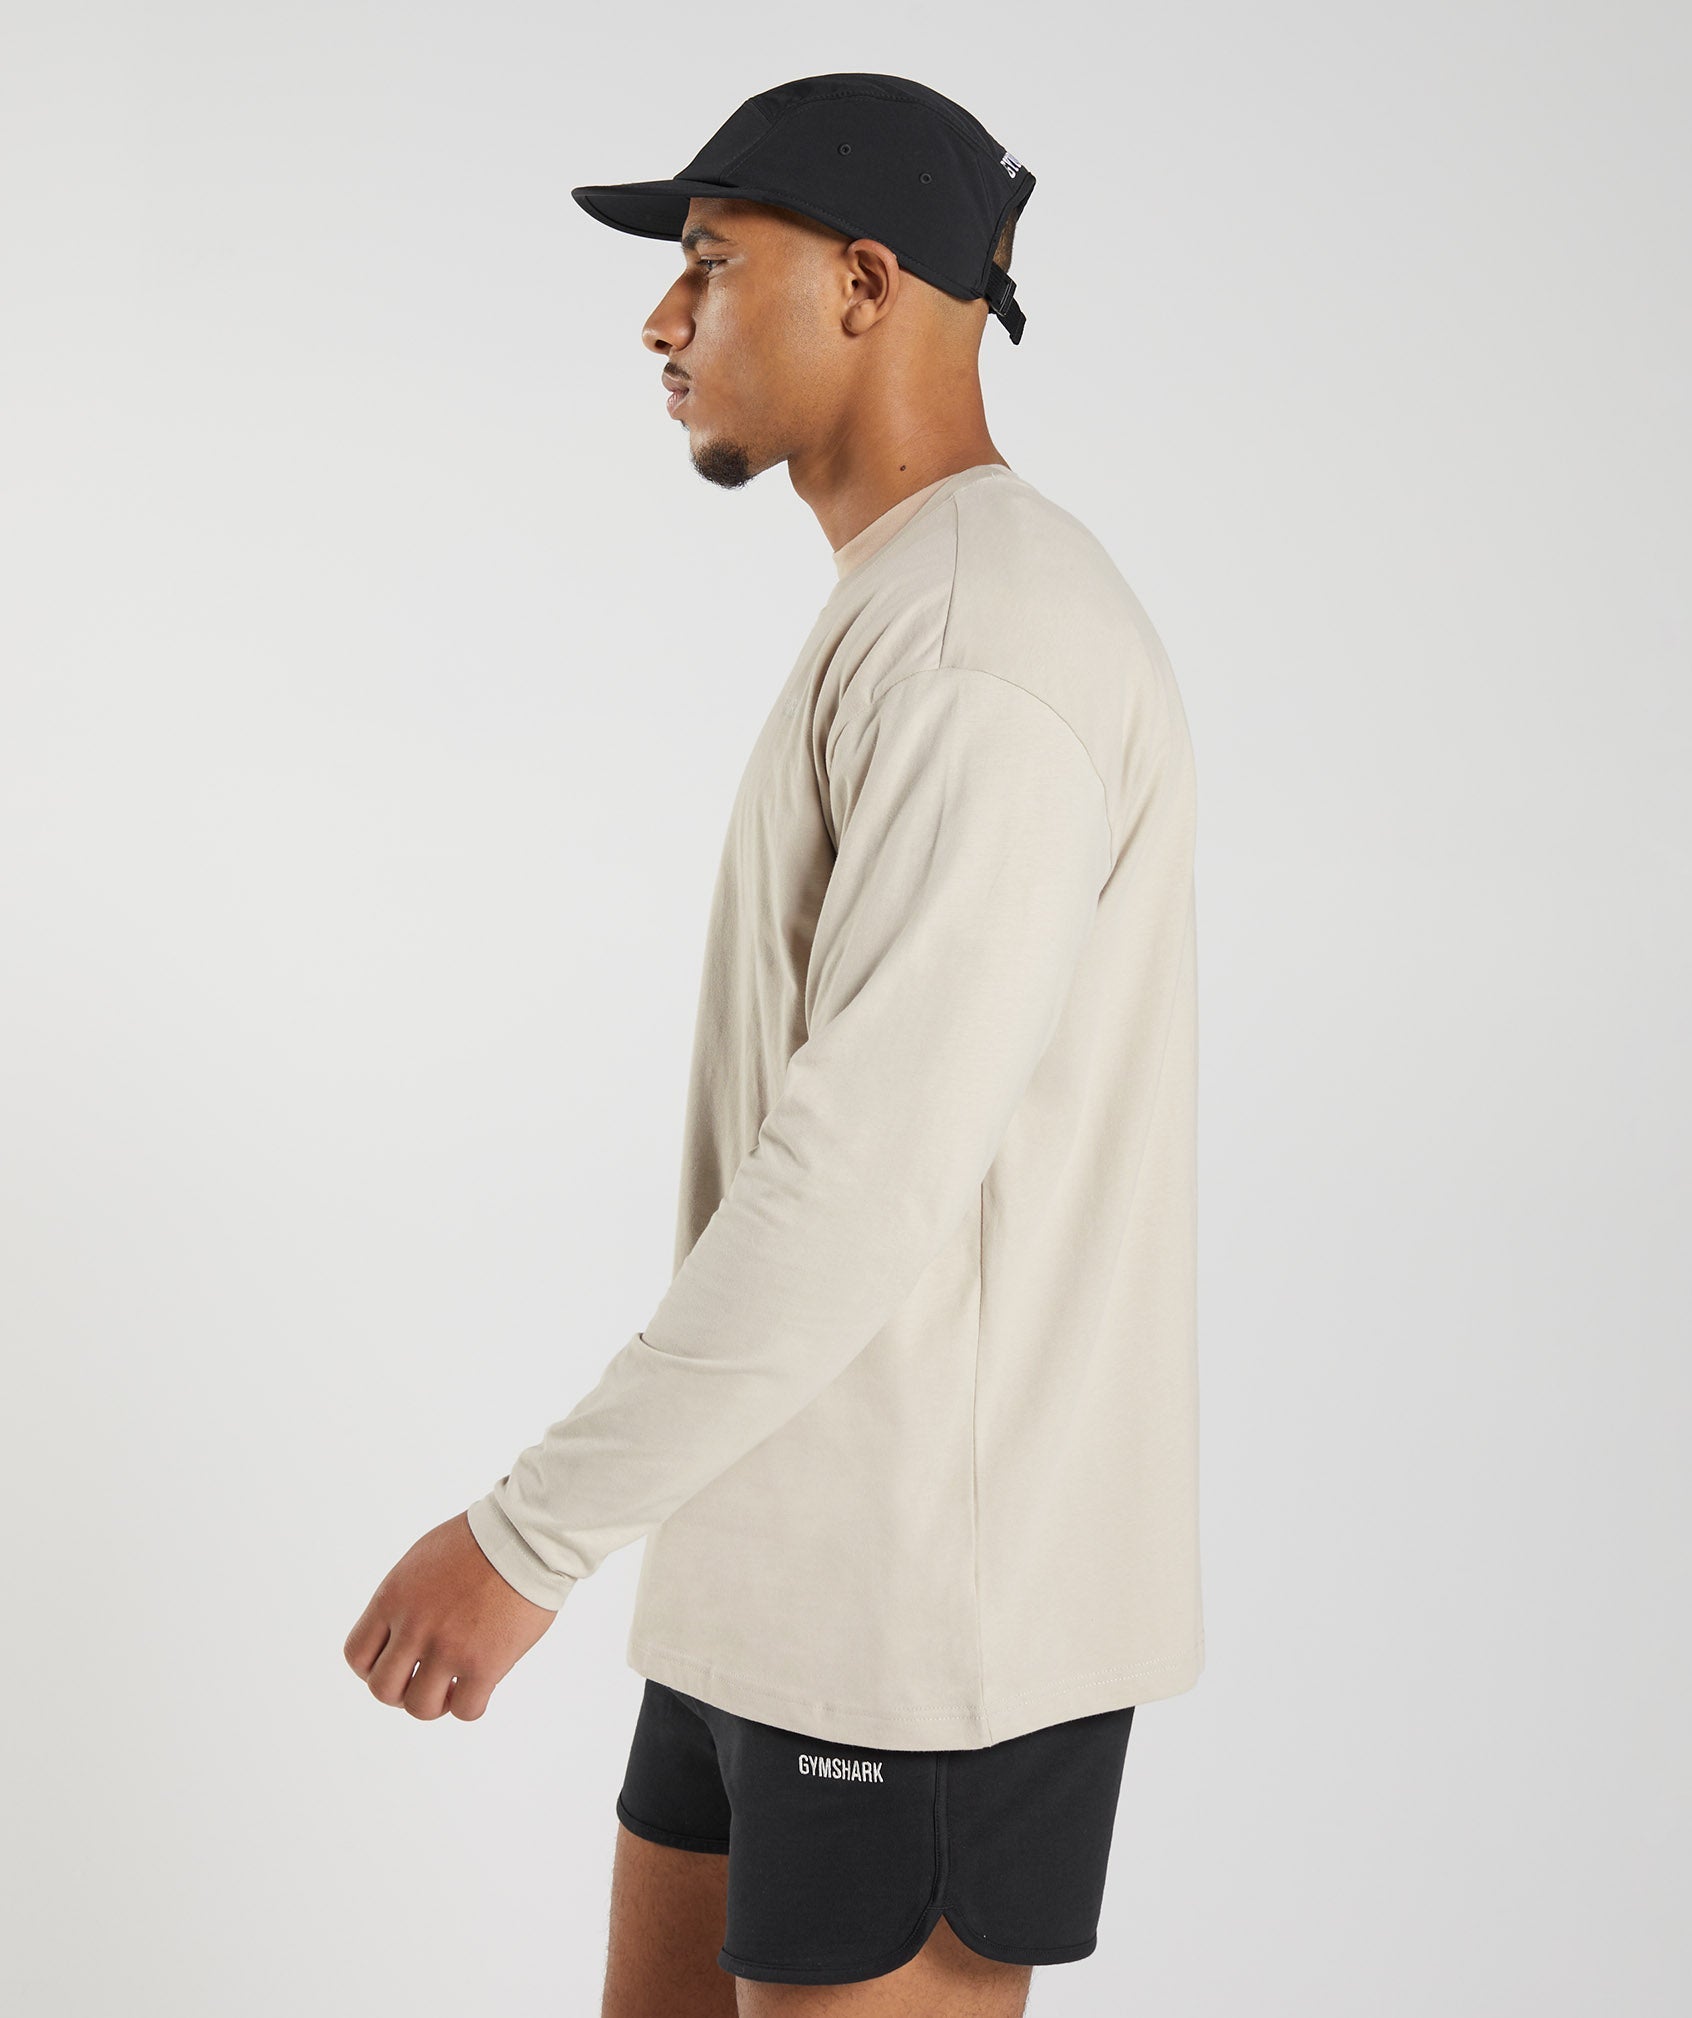 Rest Day Sweats Long Sleeve T-Shirt in Pebble Grey - view 4